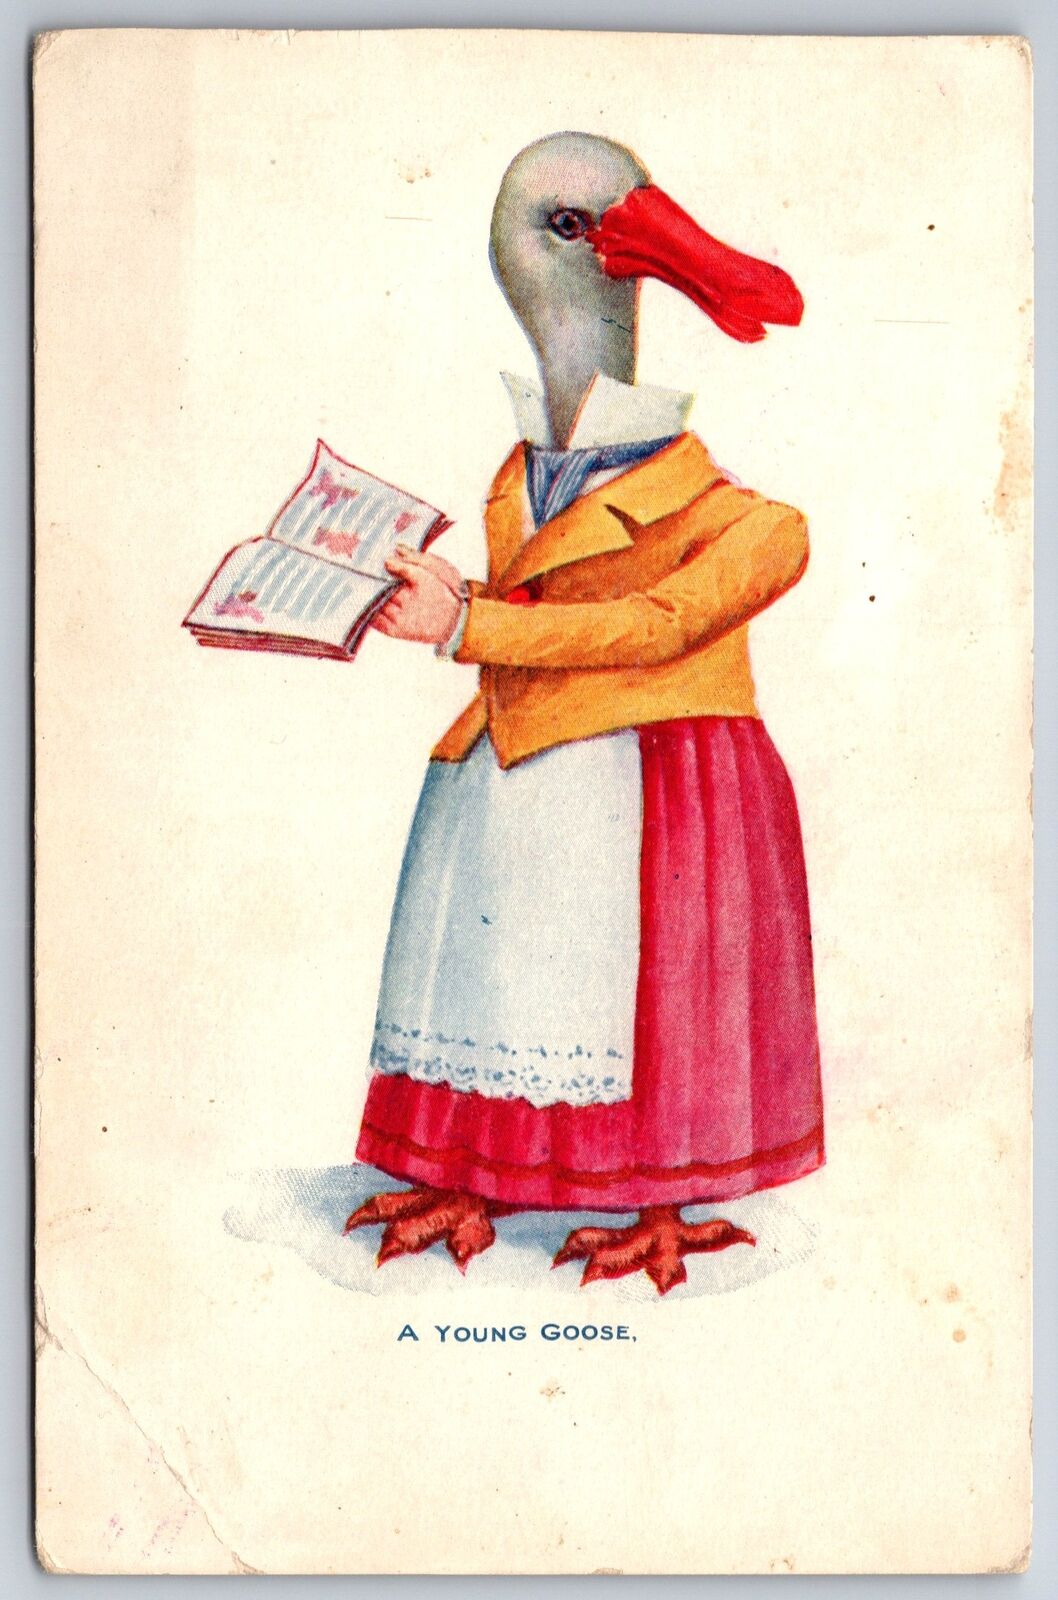 Fantasy~Anthropomorphic Dressed Goose~Human Hands Holds Book~A Young Goose~c1905